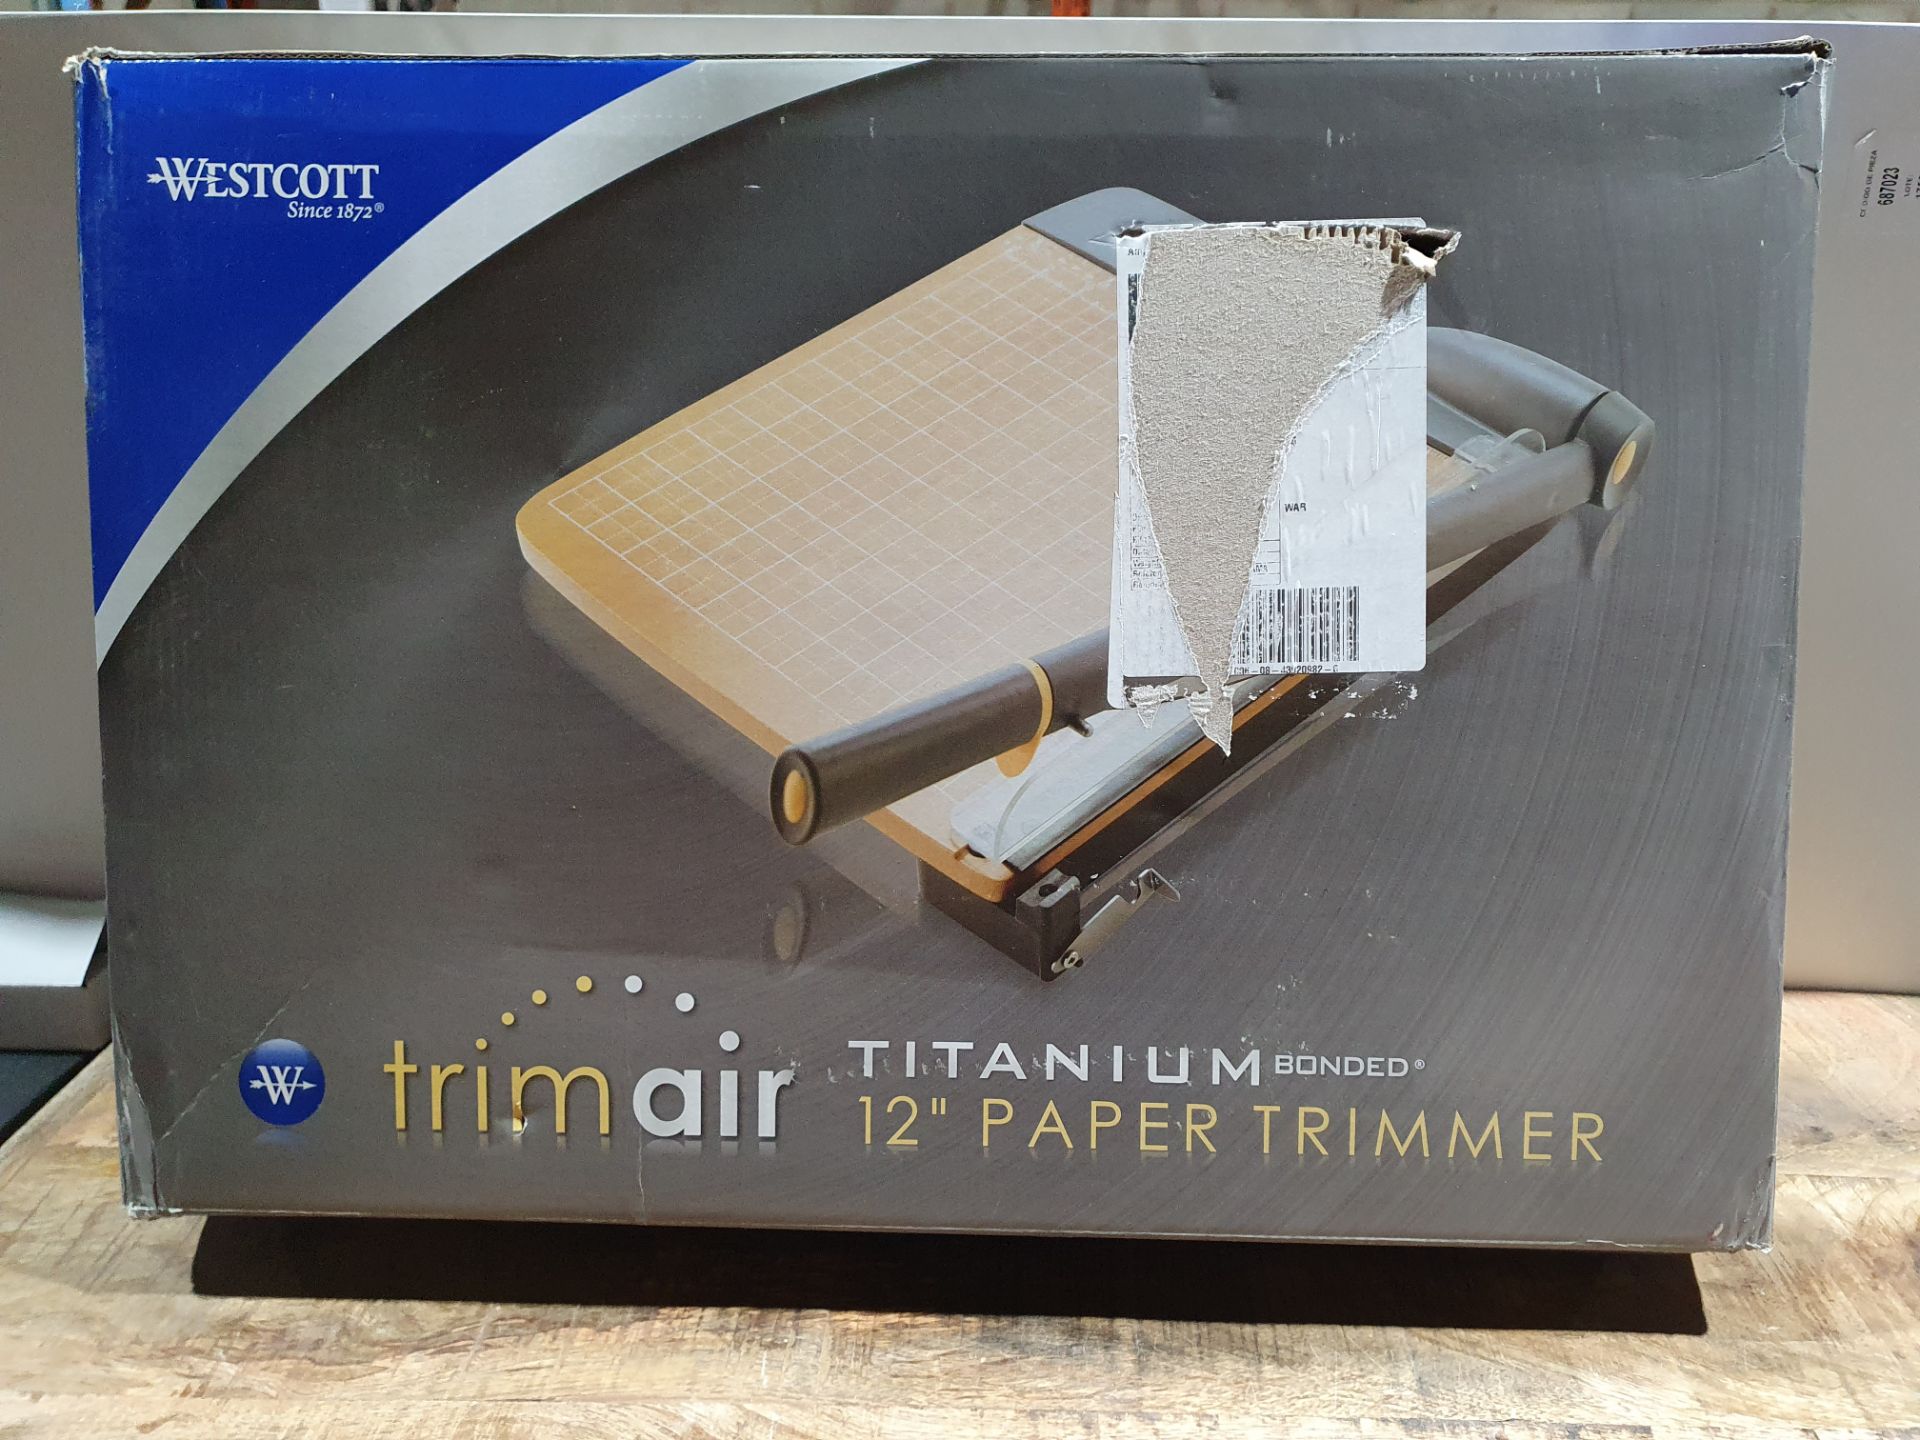 WESTCOTT TRIM AIR 12" PAPER TRIMMER RRP £59.99Condition ReportAppraisal Available on Request - All